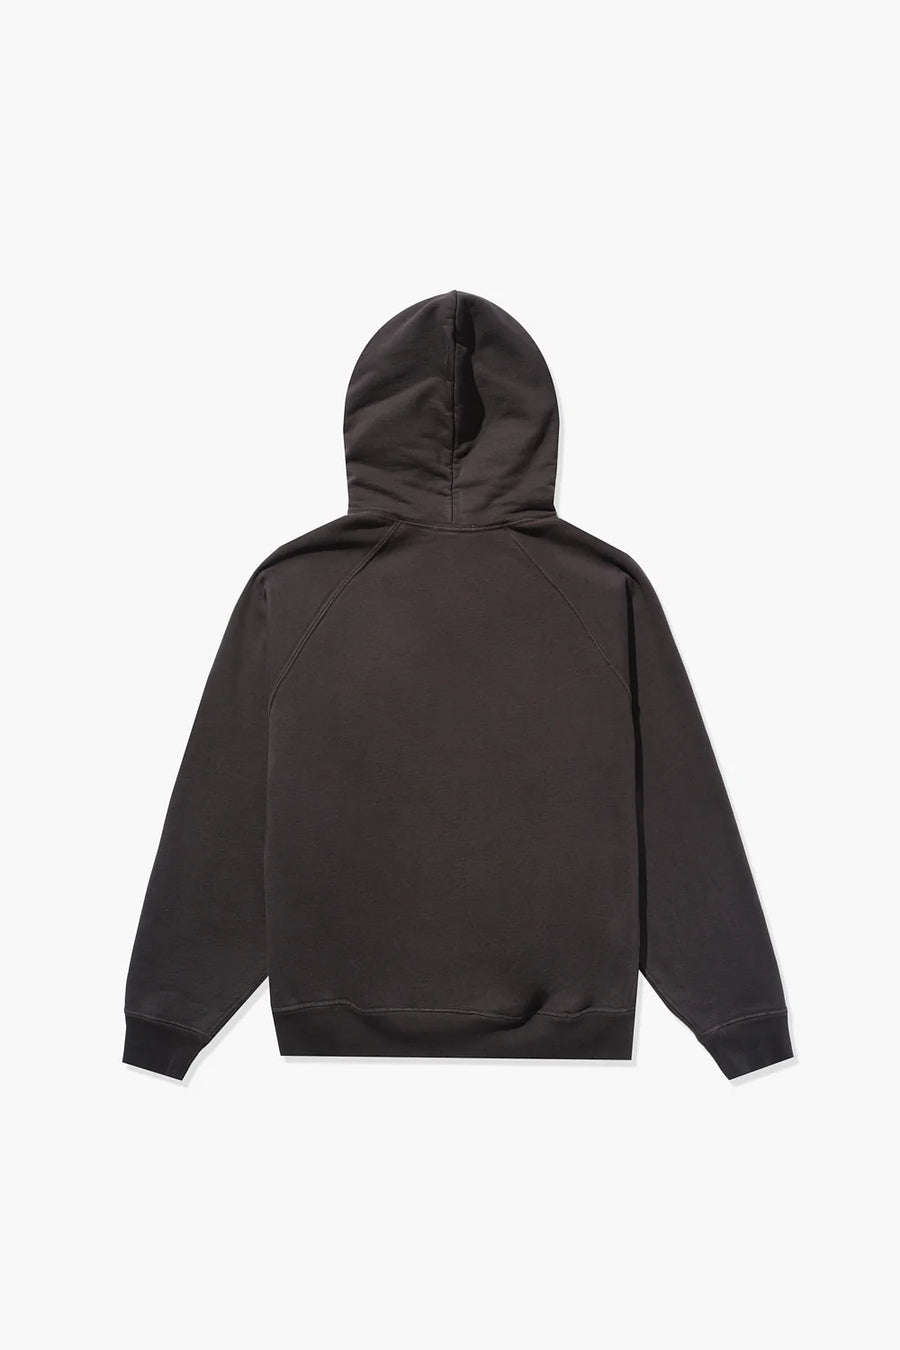 Super Weighted Hoodie Anthracite